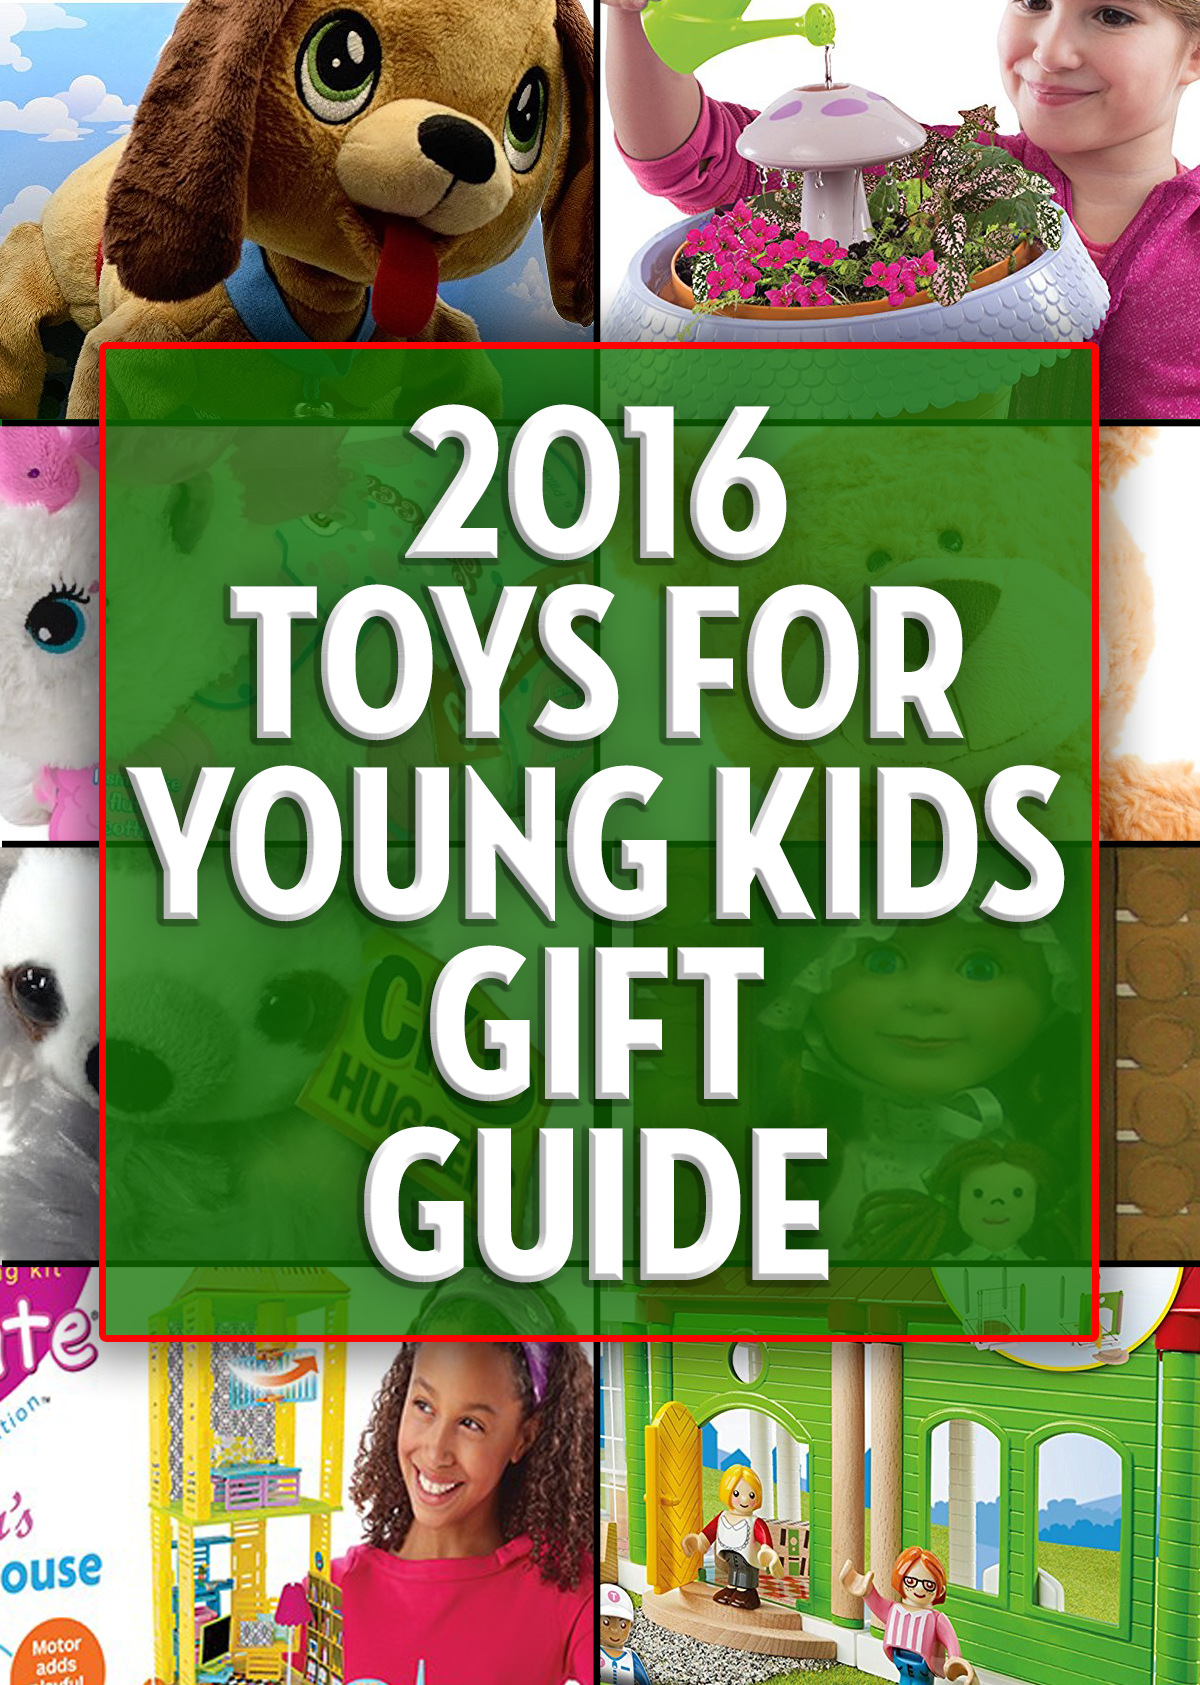 So many choices for young kids in the toy aisle. These are our picks for gifts that will certainly please! Check out our Toys for Younger Kids Gift Guide! - SahmReviews.com